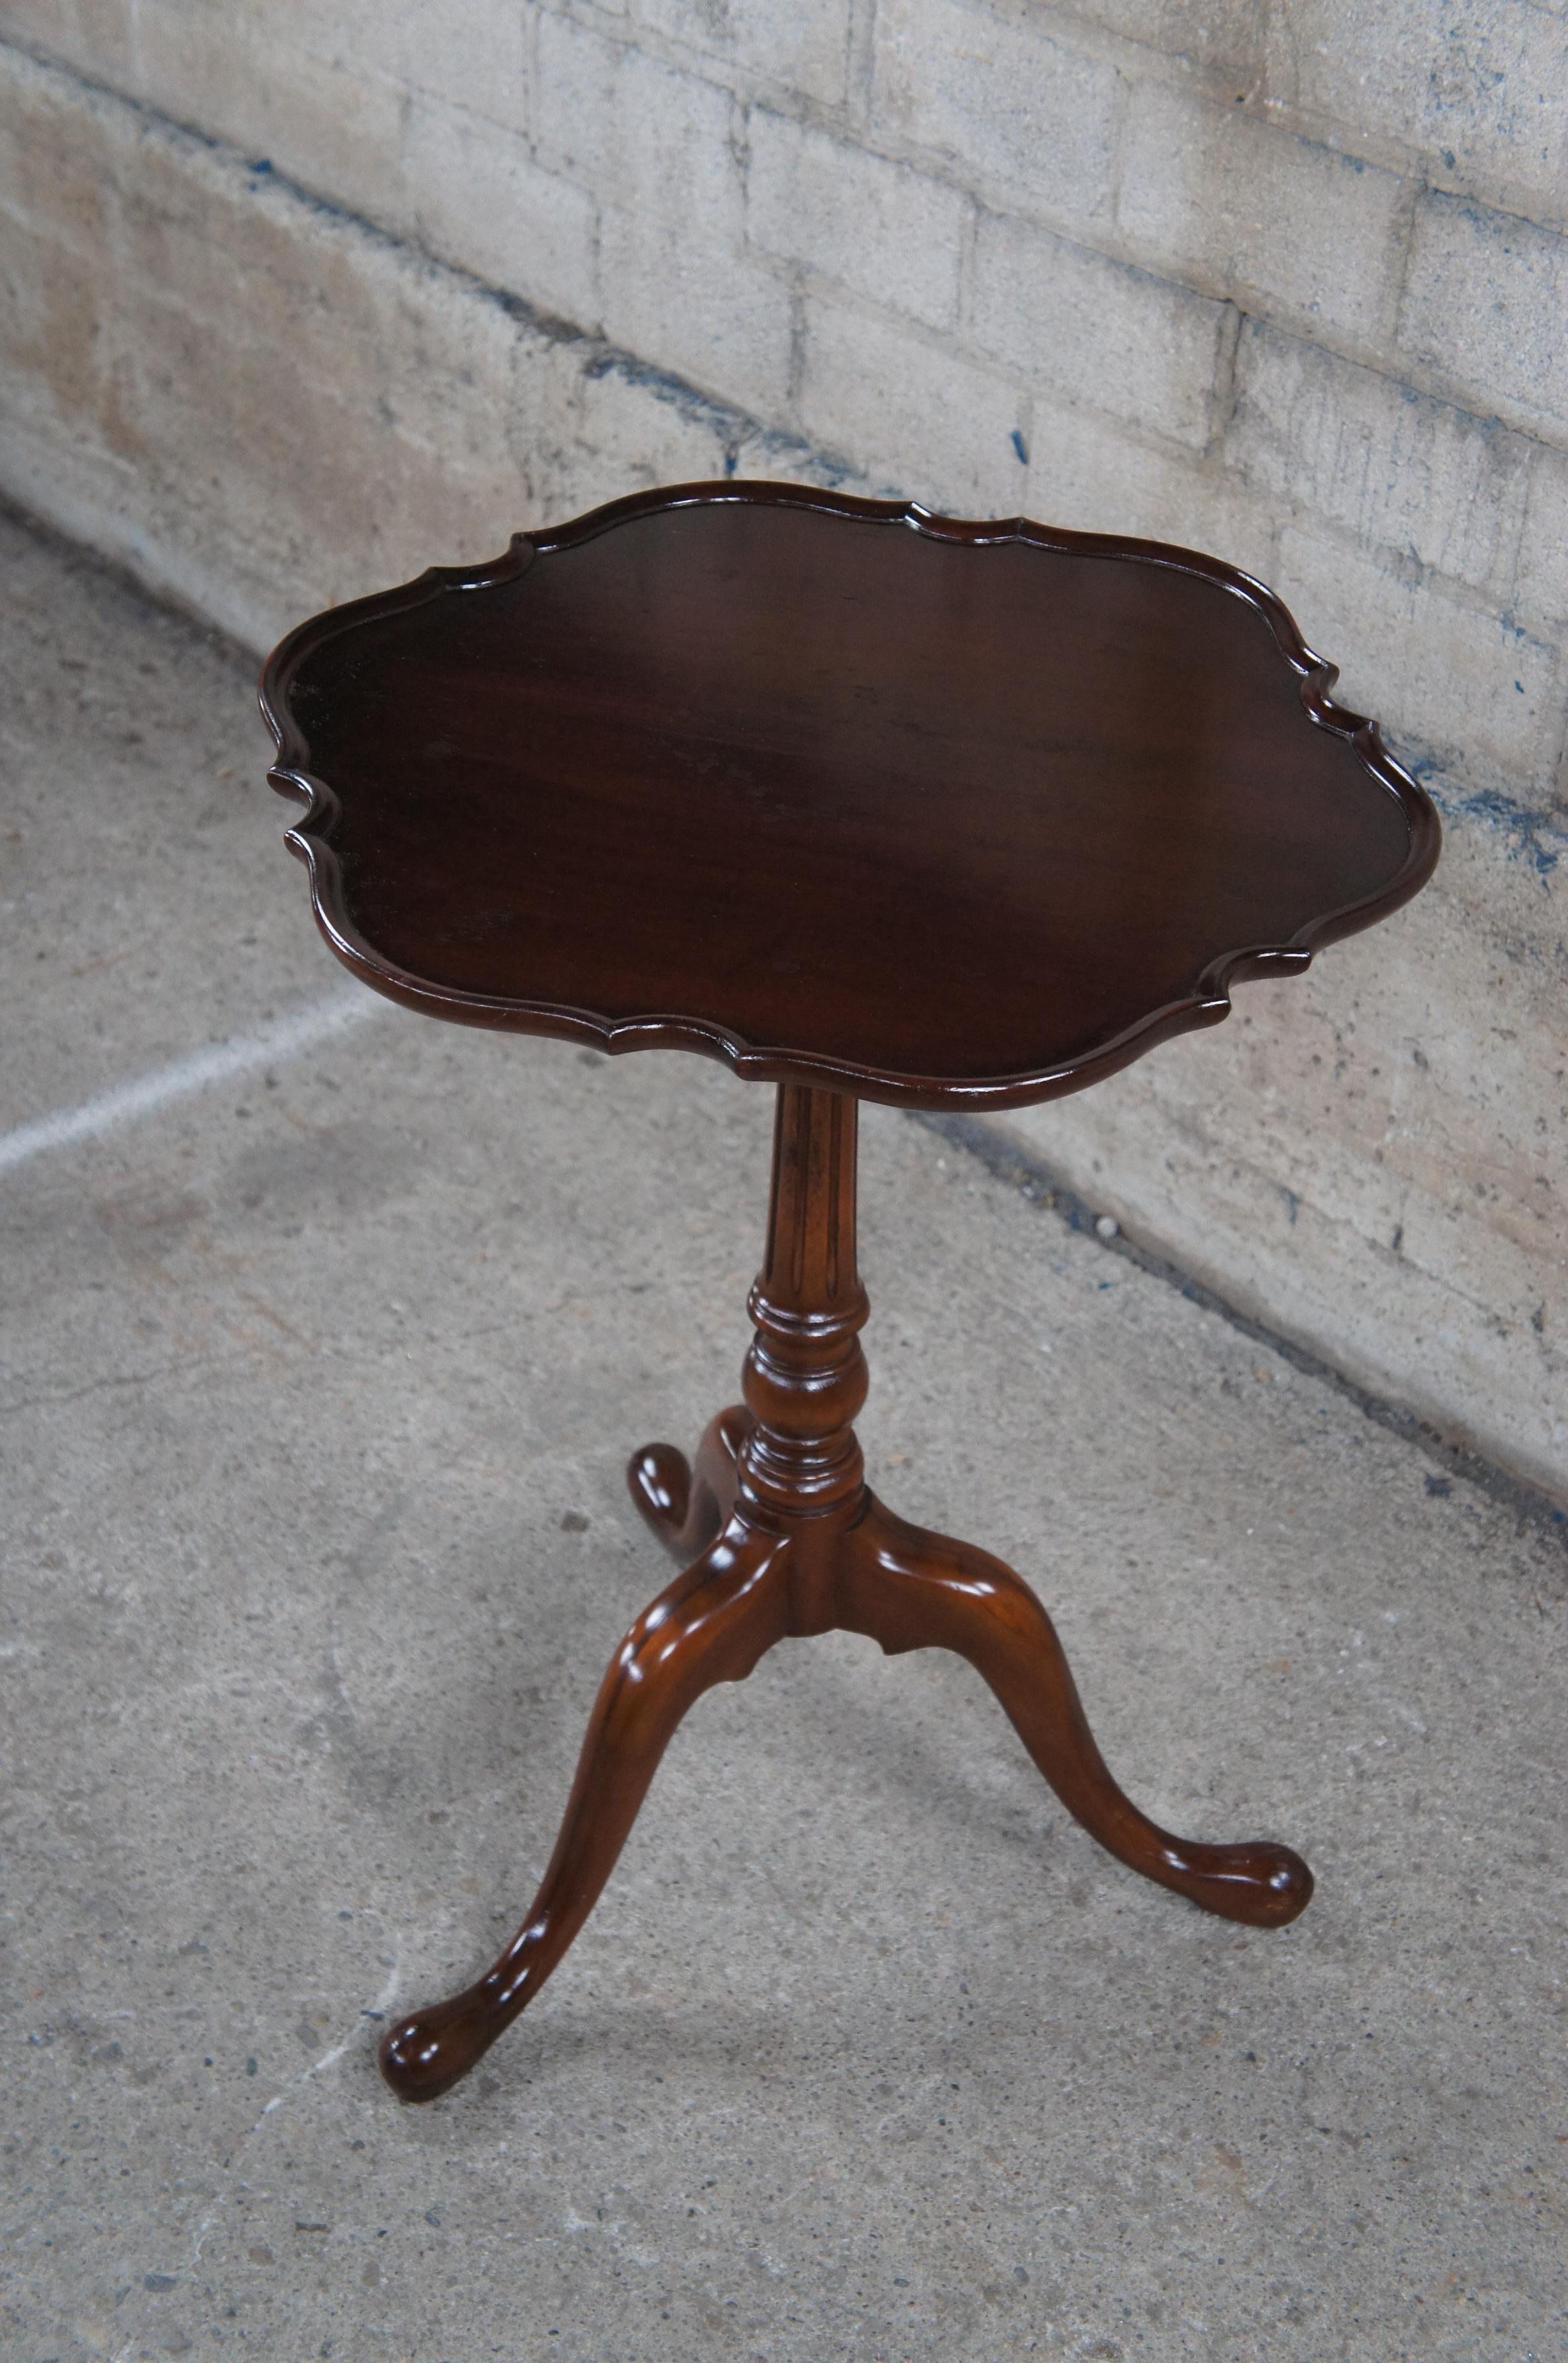 Antique Imperial Furniture Queen Anne Mahogany Pie Crust Pedestal Table Stand In Good Condition For Sale In Dayton, OH